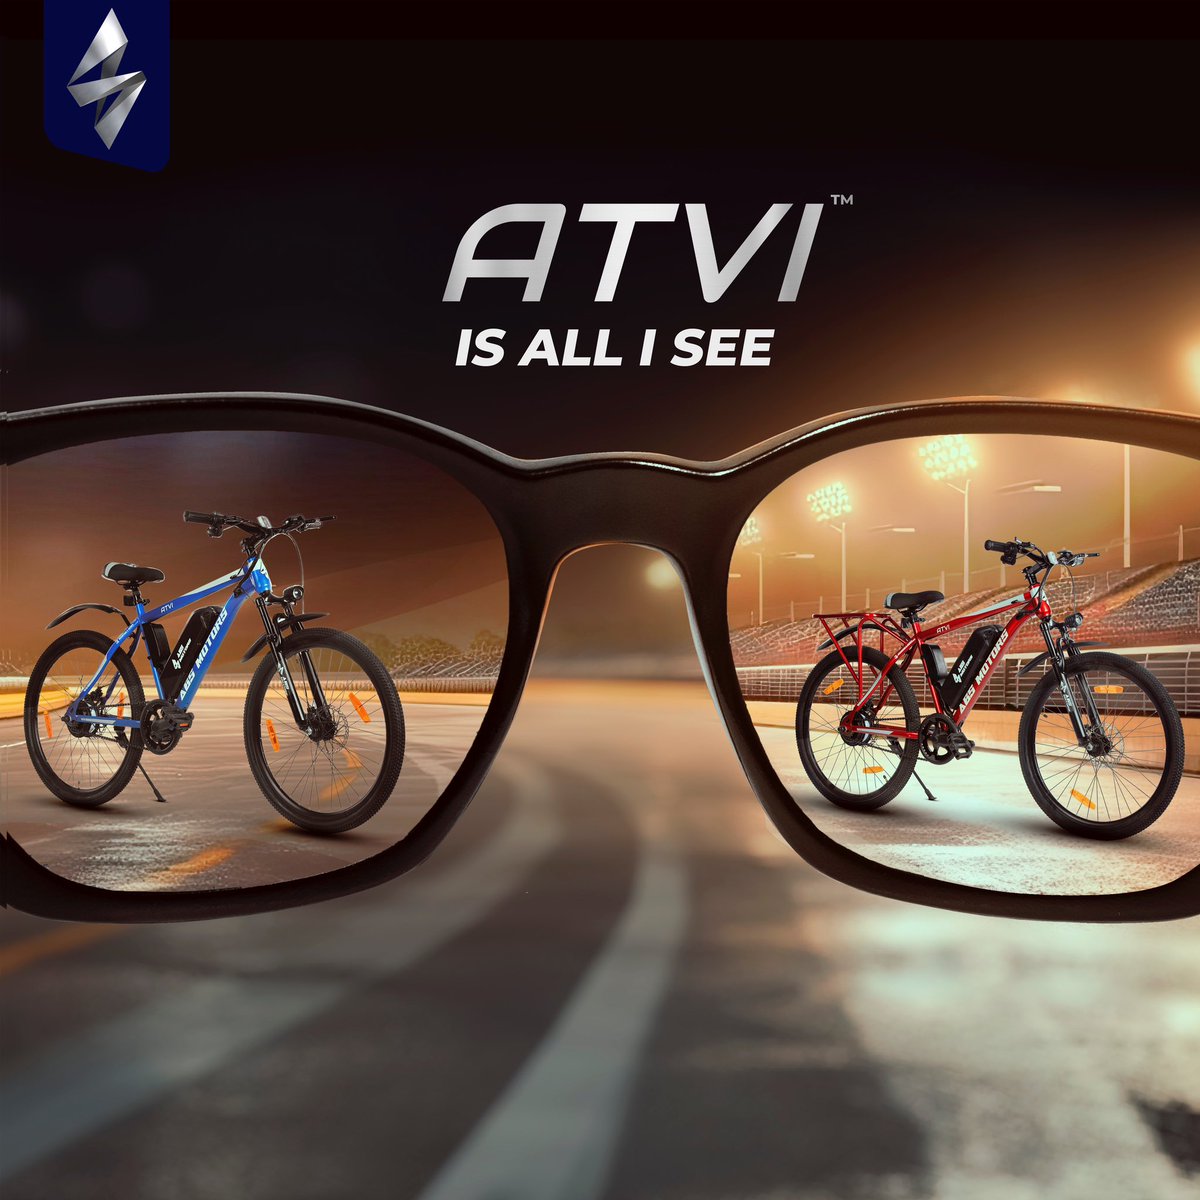 Nothing as eye-capturing as your #ATVI™ Electric Bicycle!

#ABS #ABSGroup #ABSMotors #ElectricCycle #ElectricBicycle #ElectricVehicles #EcoFriendly #ECycle #EBicycle #ElectricVehicle #ElectricBike #EBike #EBikes #EBicycles #ElectricBicycles